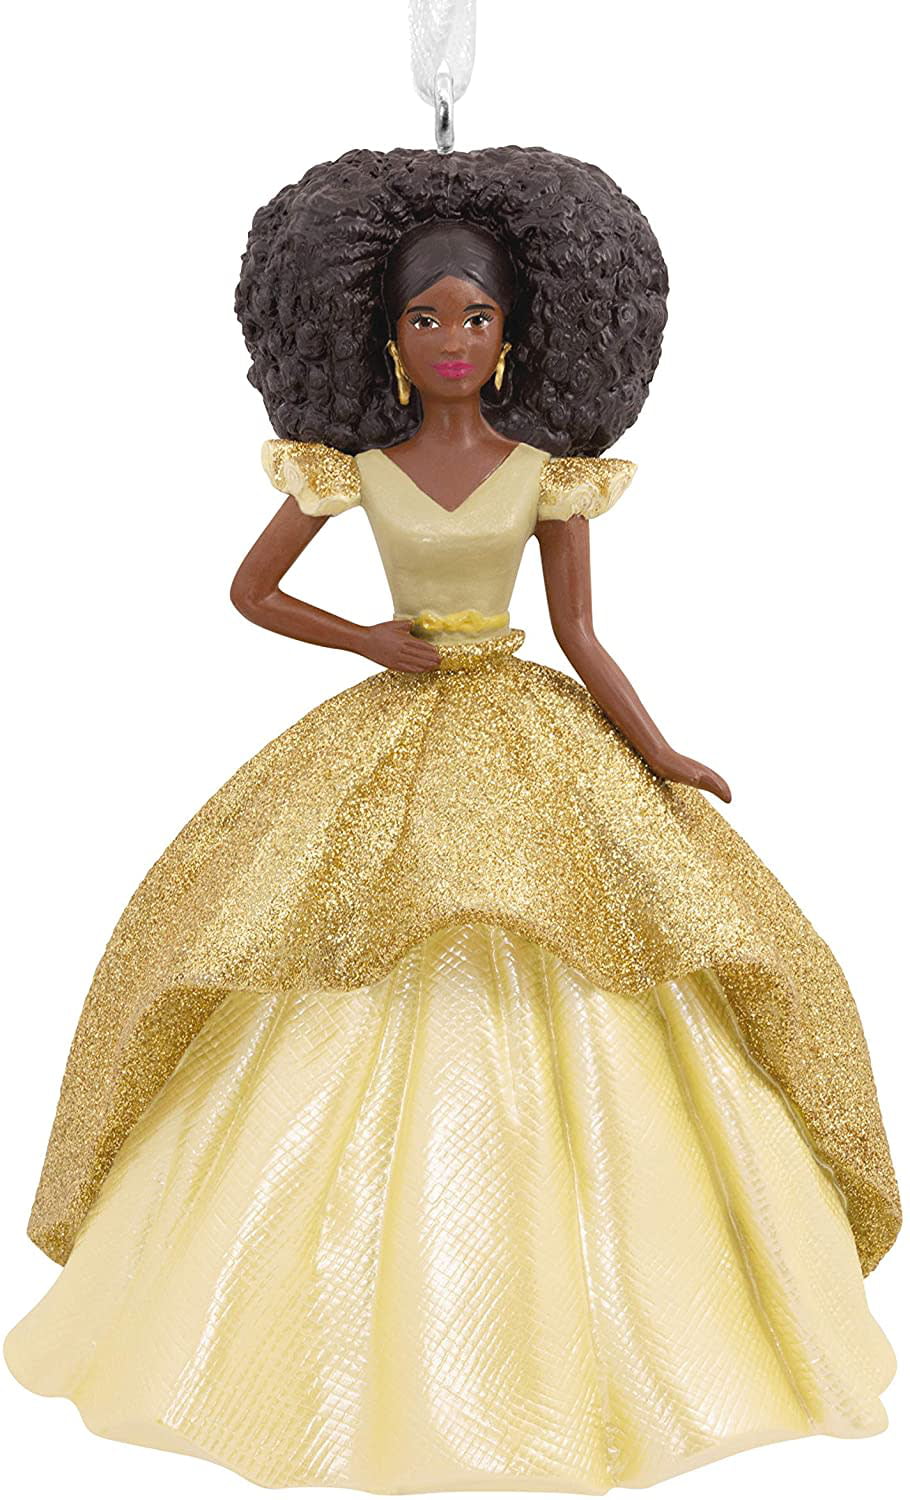 African American Holiday Barbie Ornament